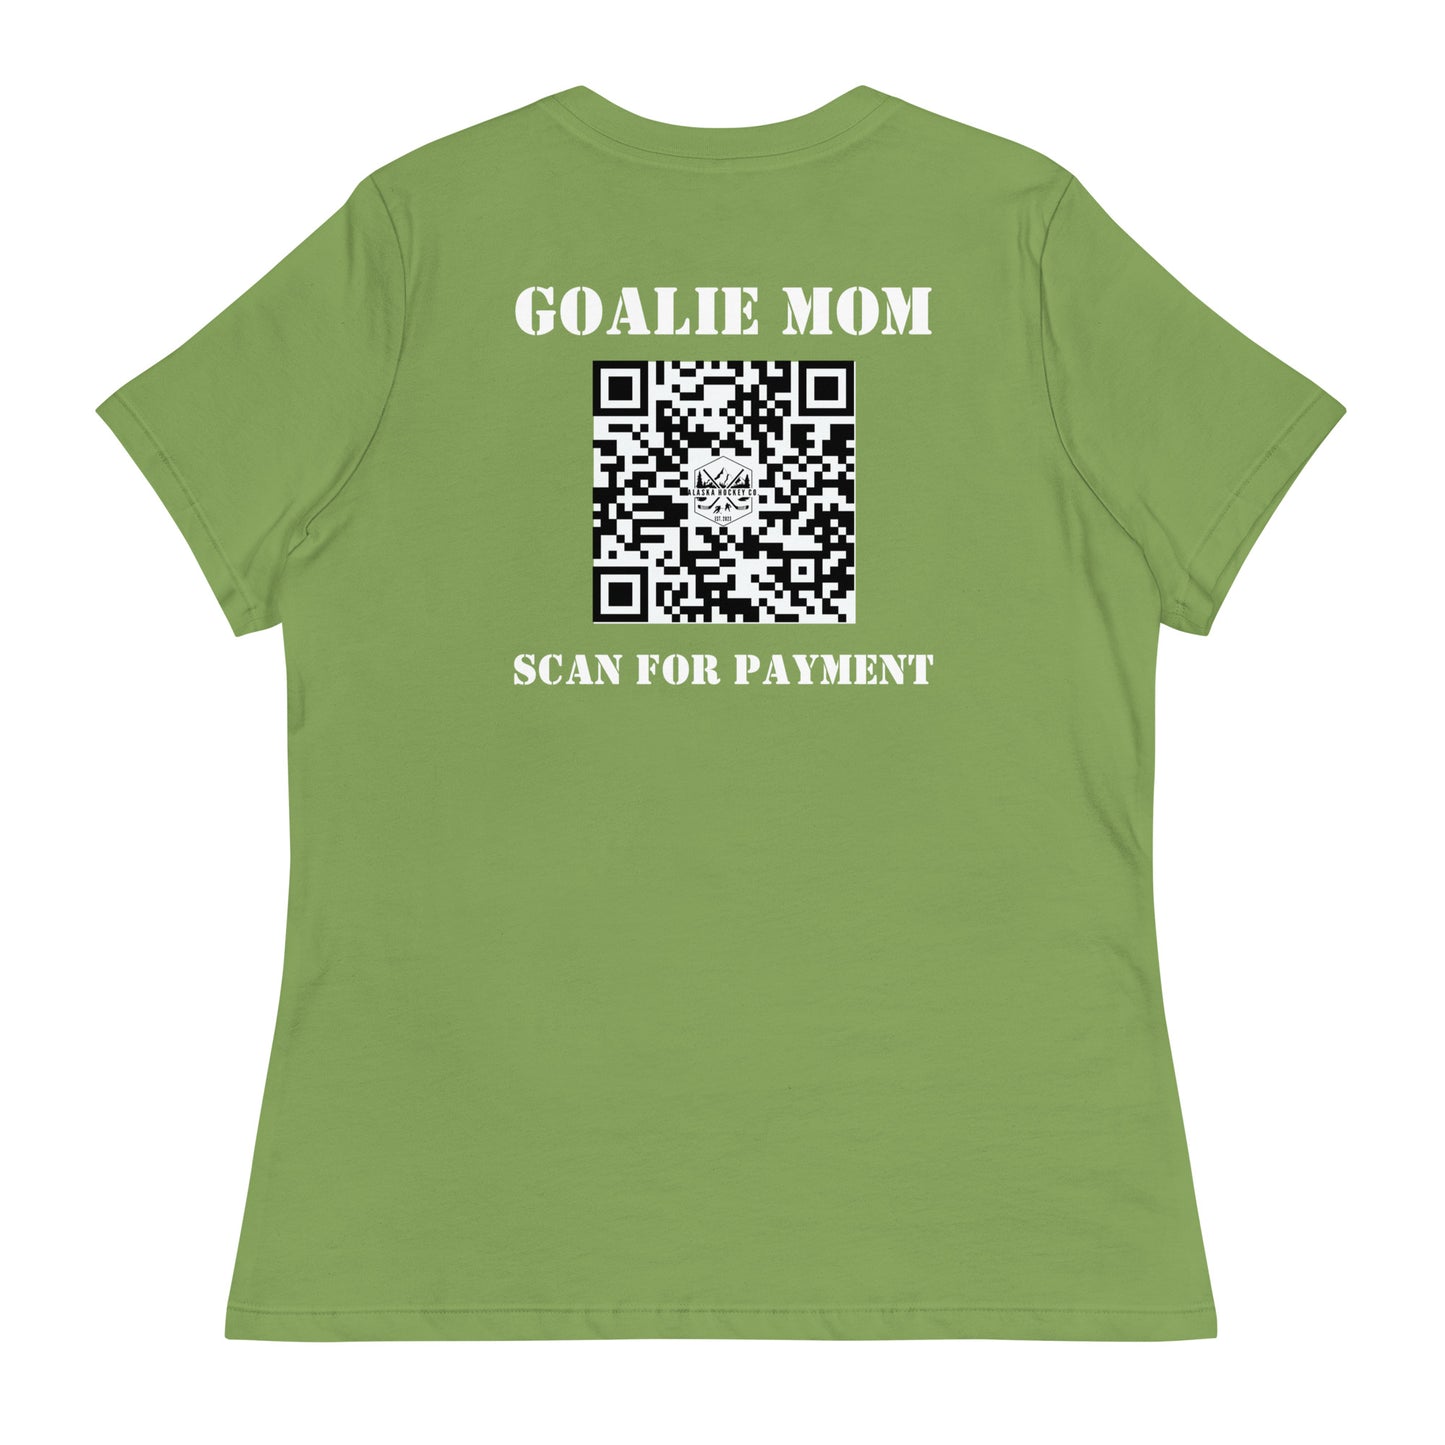 Goalie Mom Scan for Payment T-Shirt